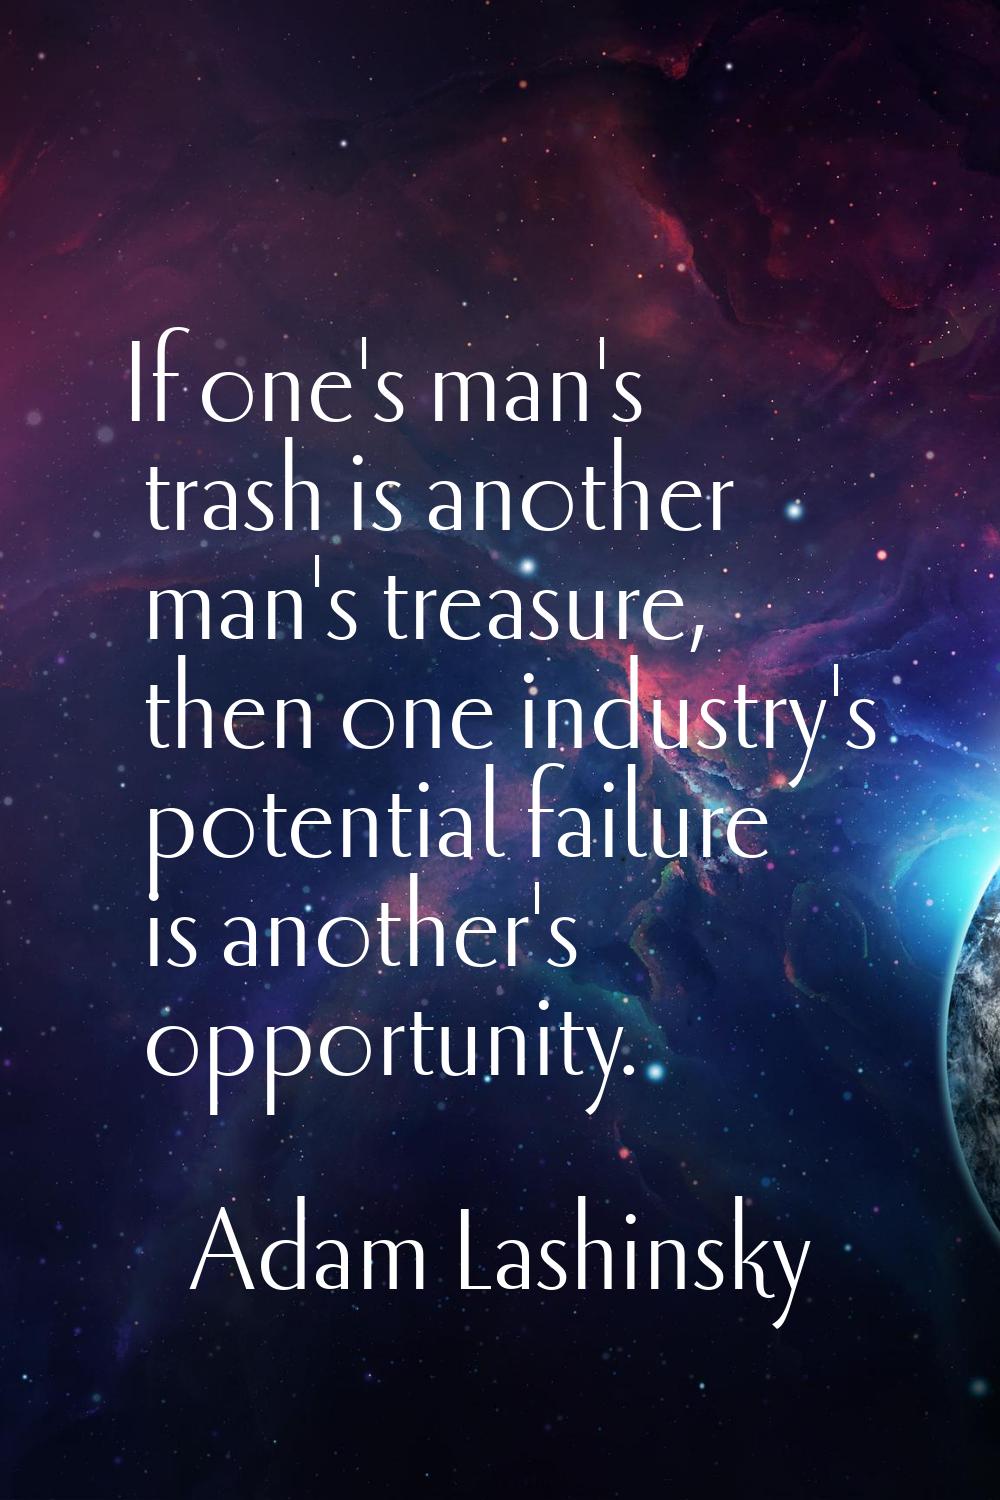 If one's man's trash is another man's treasure, then one industry's potential failure is another's 